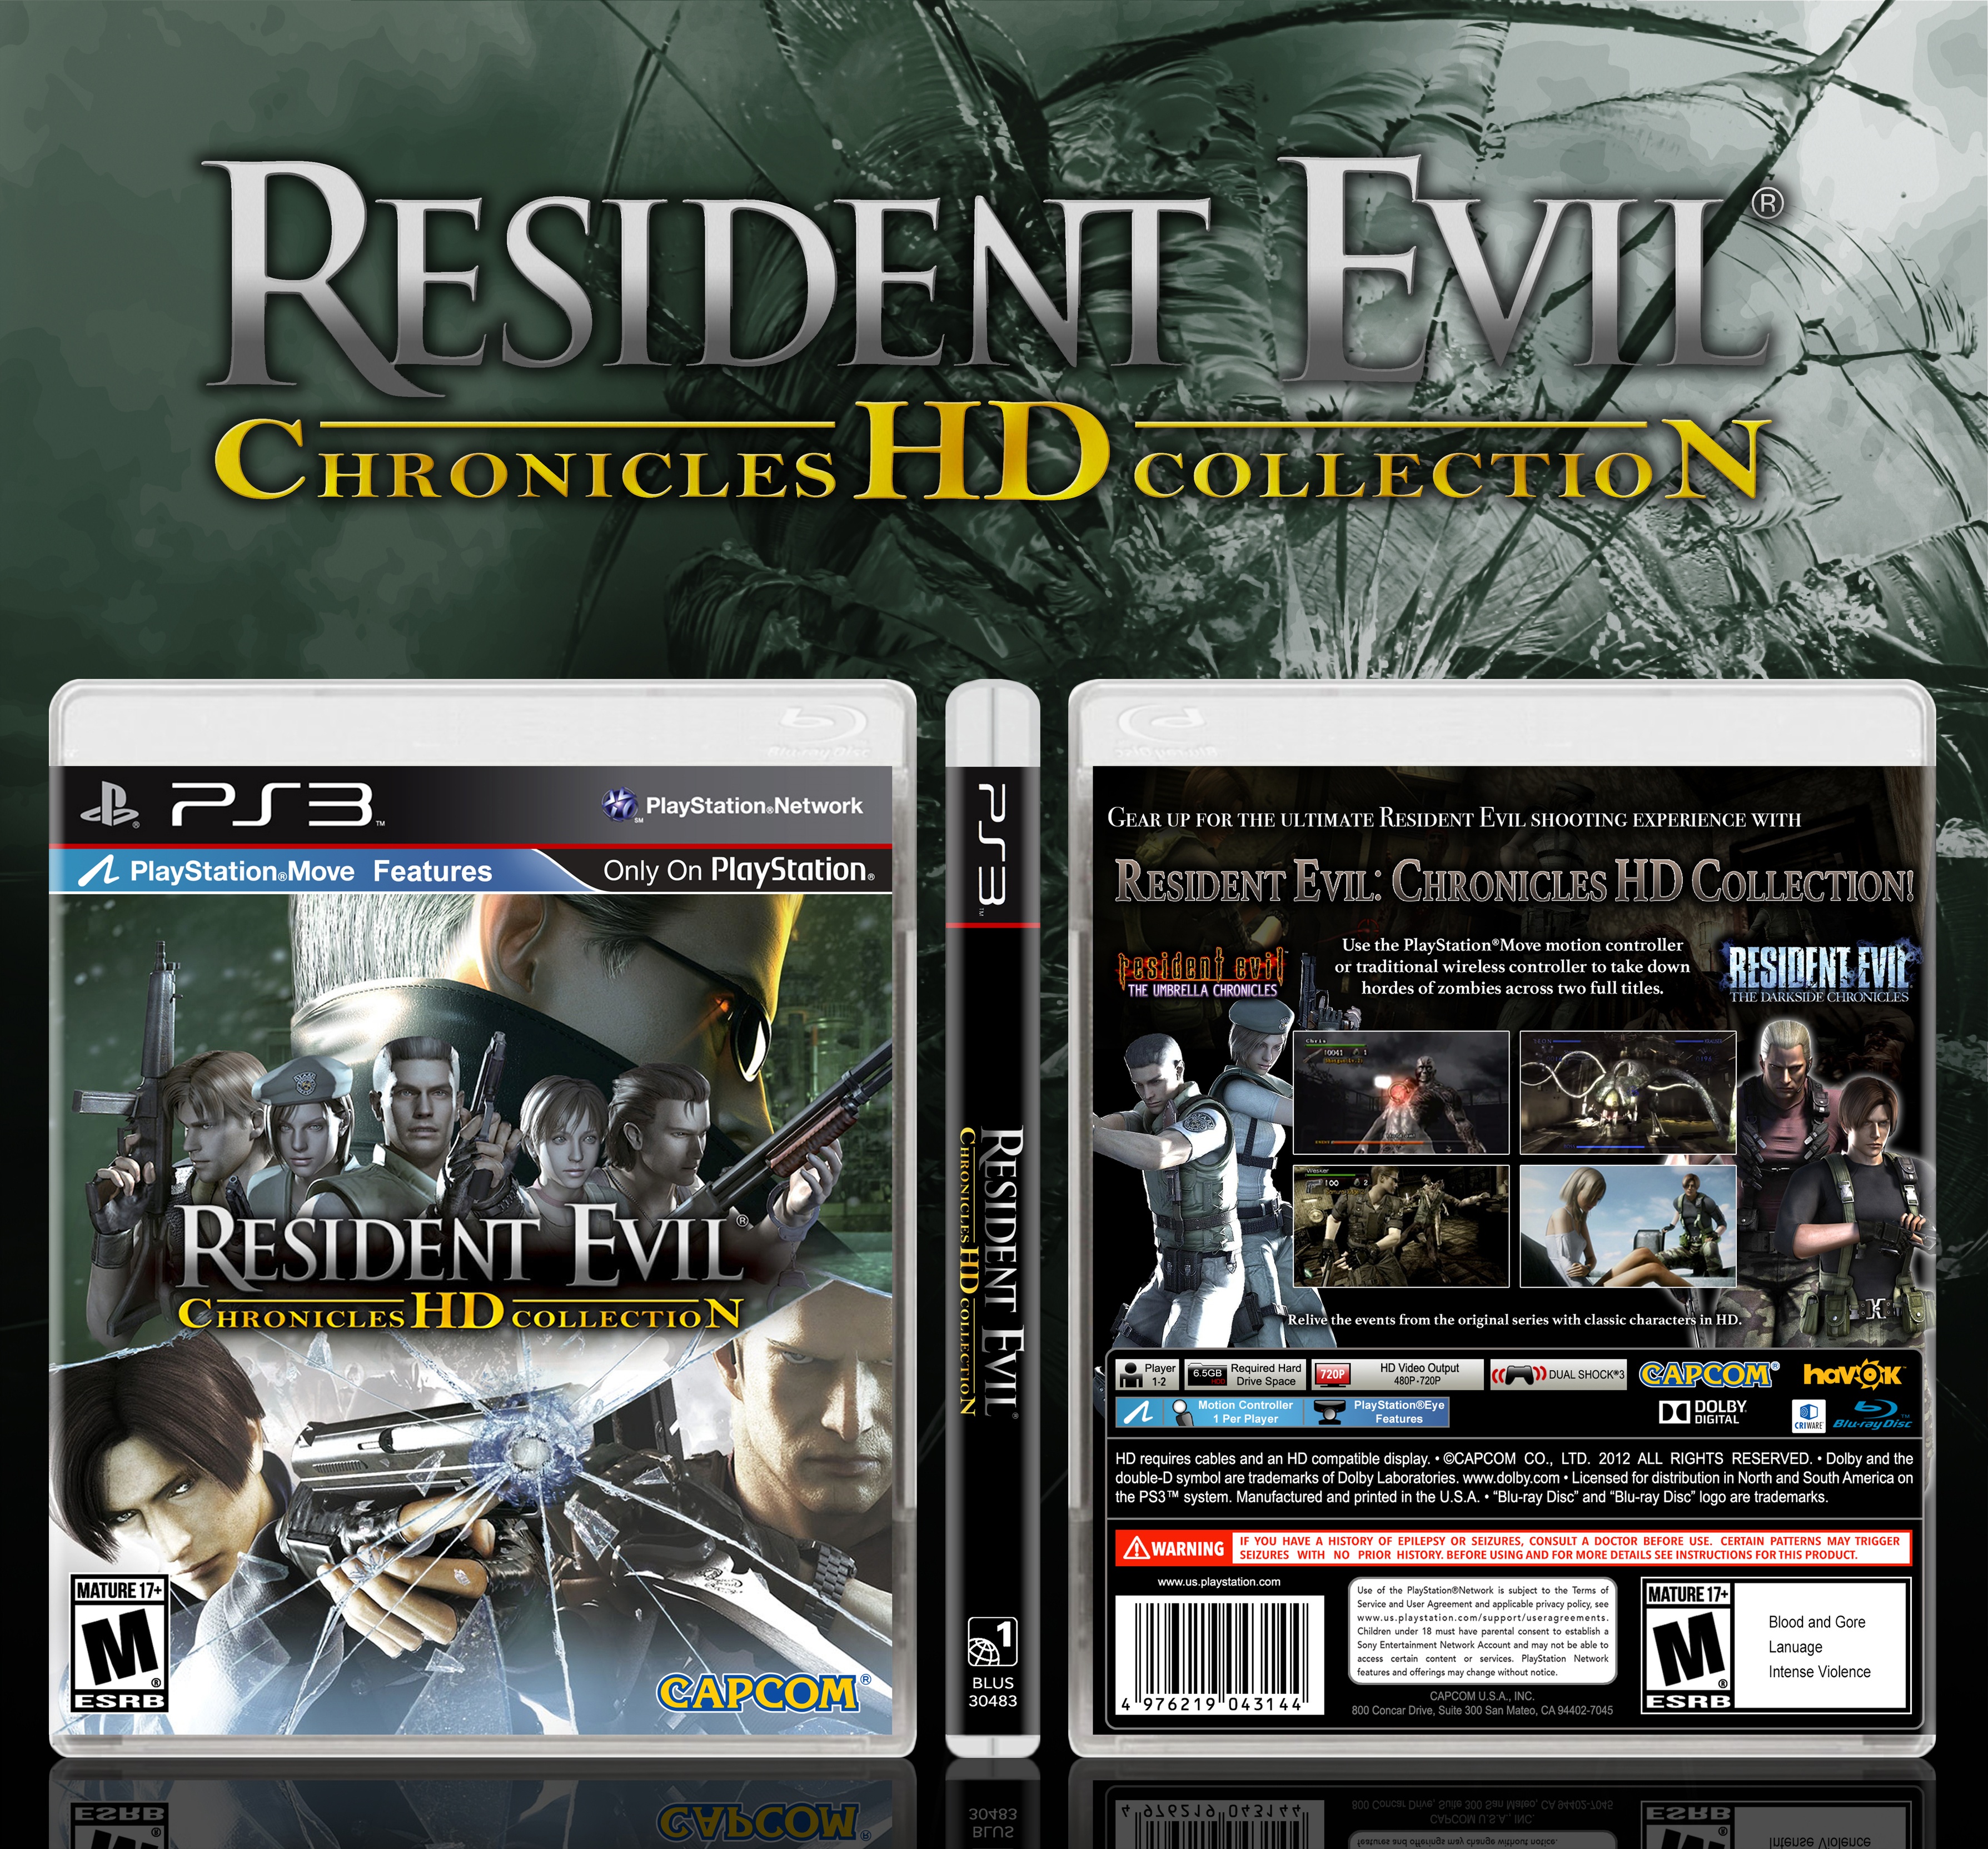 Viewing full size Resident Evil Chronicles HD Collection box cover.